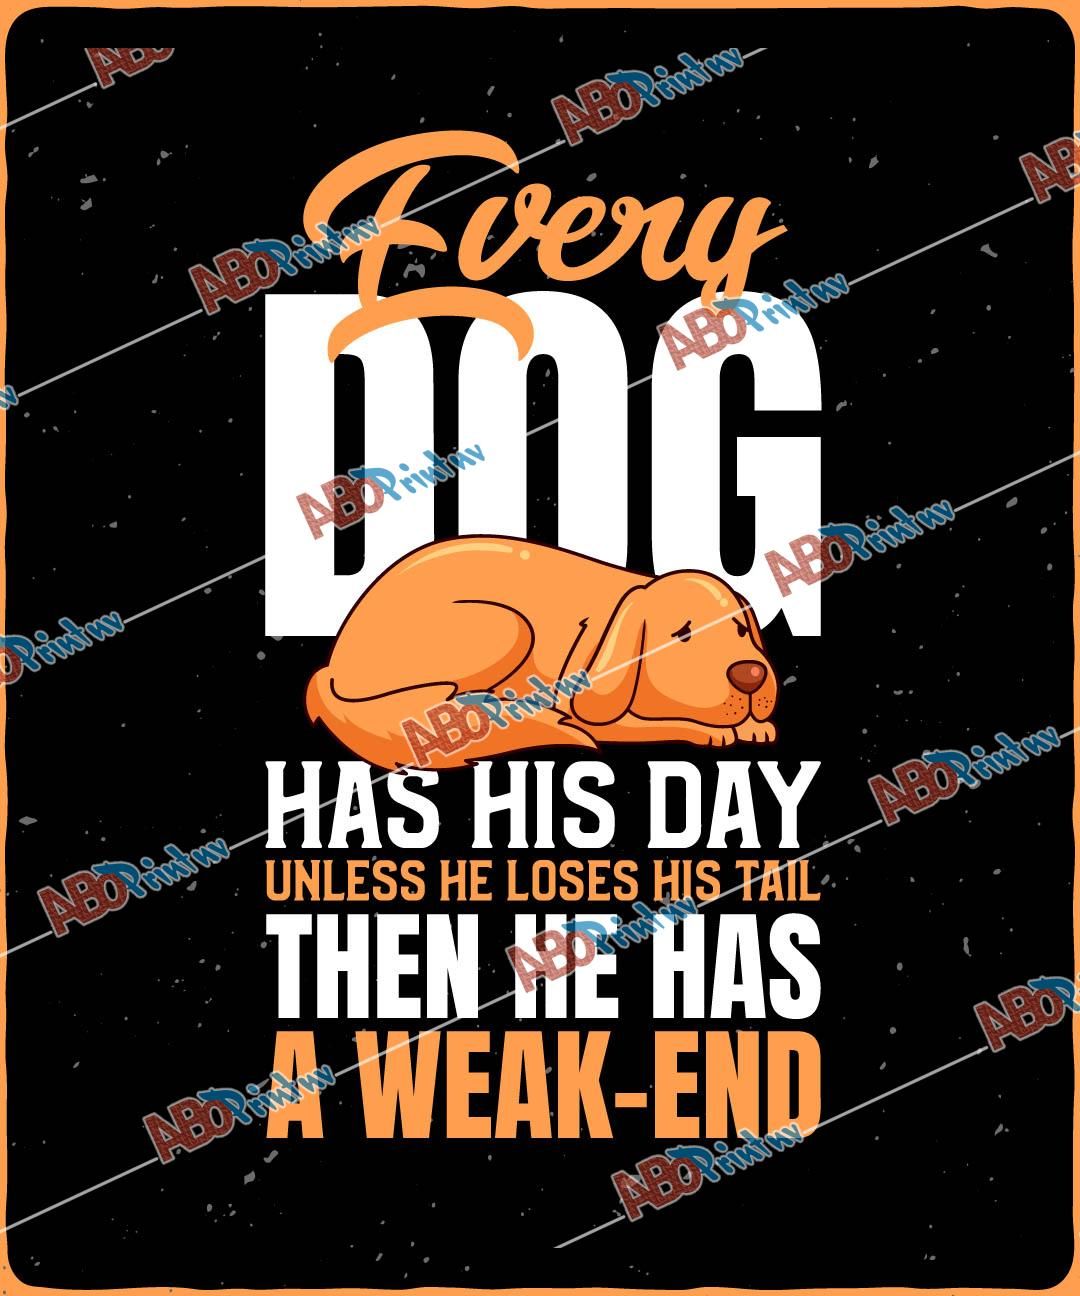 Every dog has his day, unless he loses his tail, then he has a weak-endJPG (1).jpg